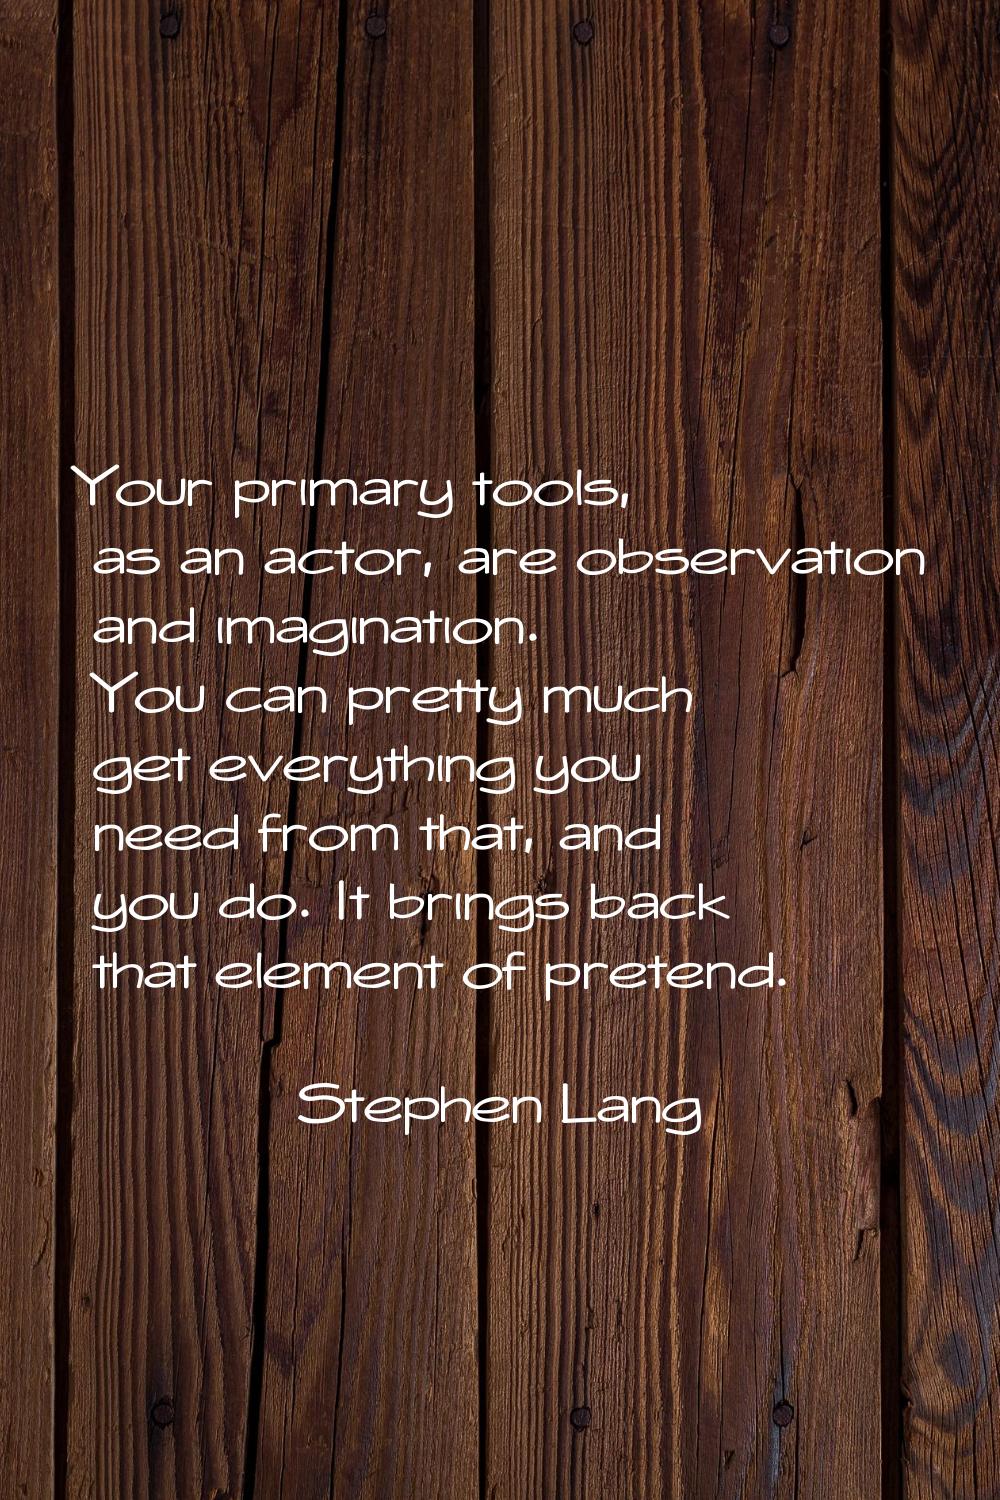 Your primary tools, as an actor, are observation and imagination. You can pretty much get everythin